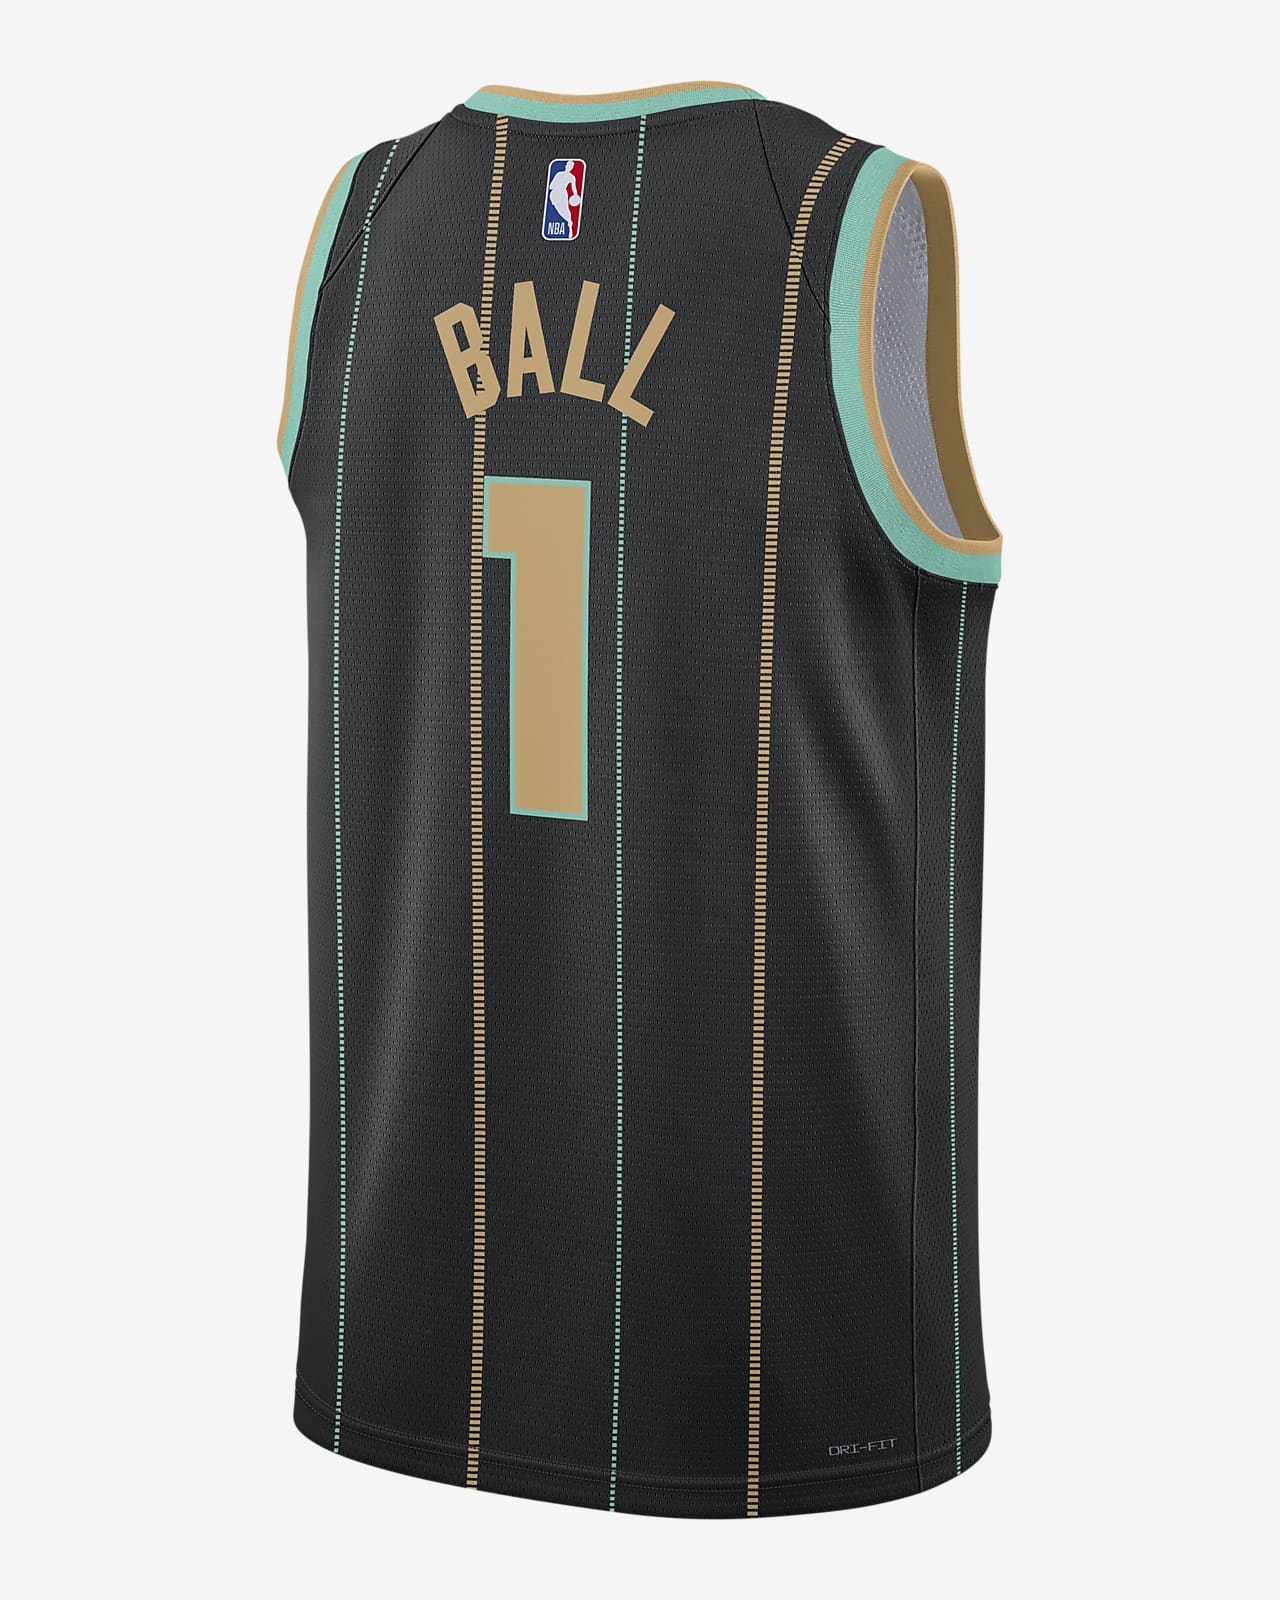 hornets youth jersey